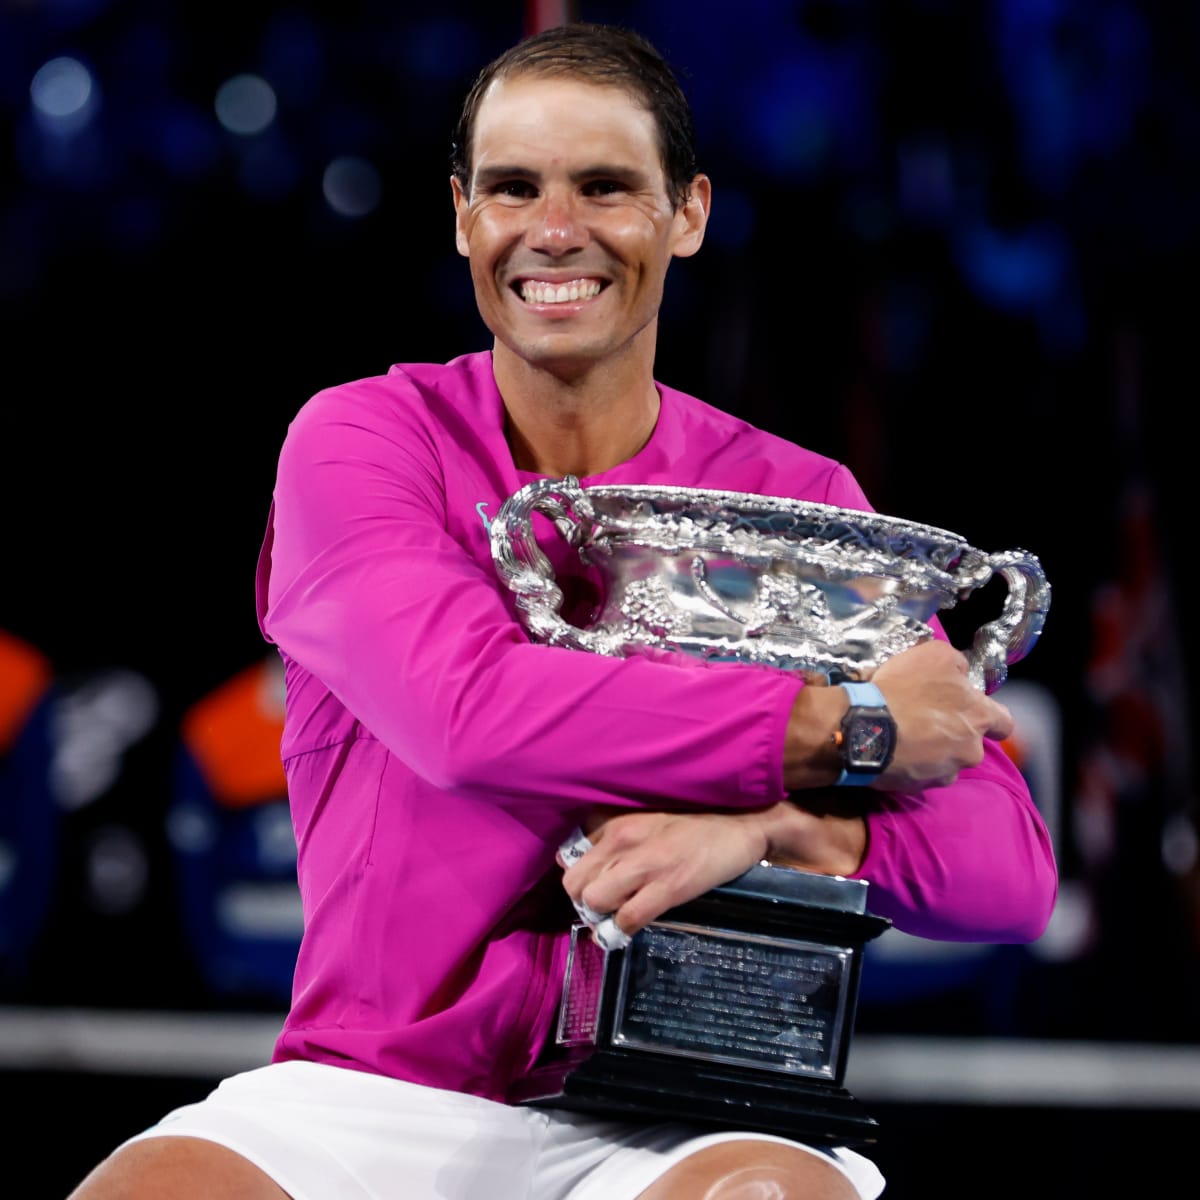 US Open 2022: Rafael Nadal can become World No.1 after winning US